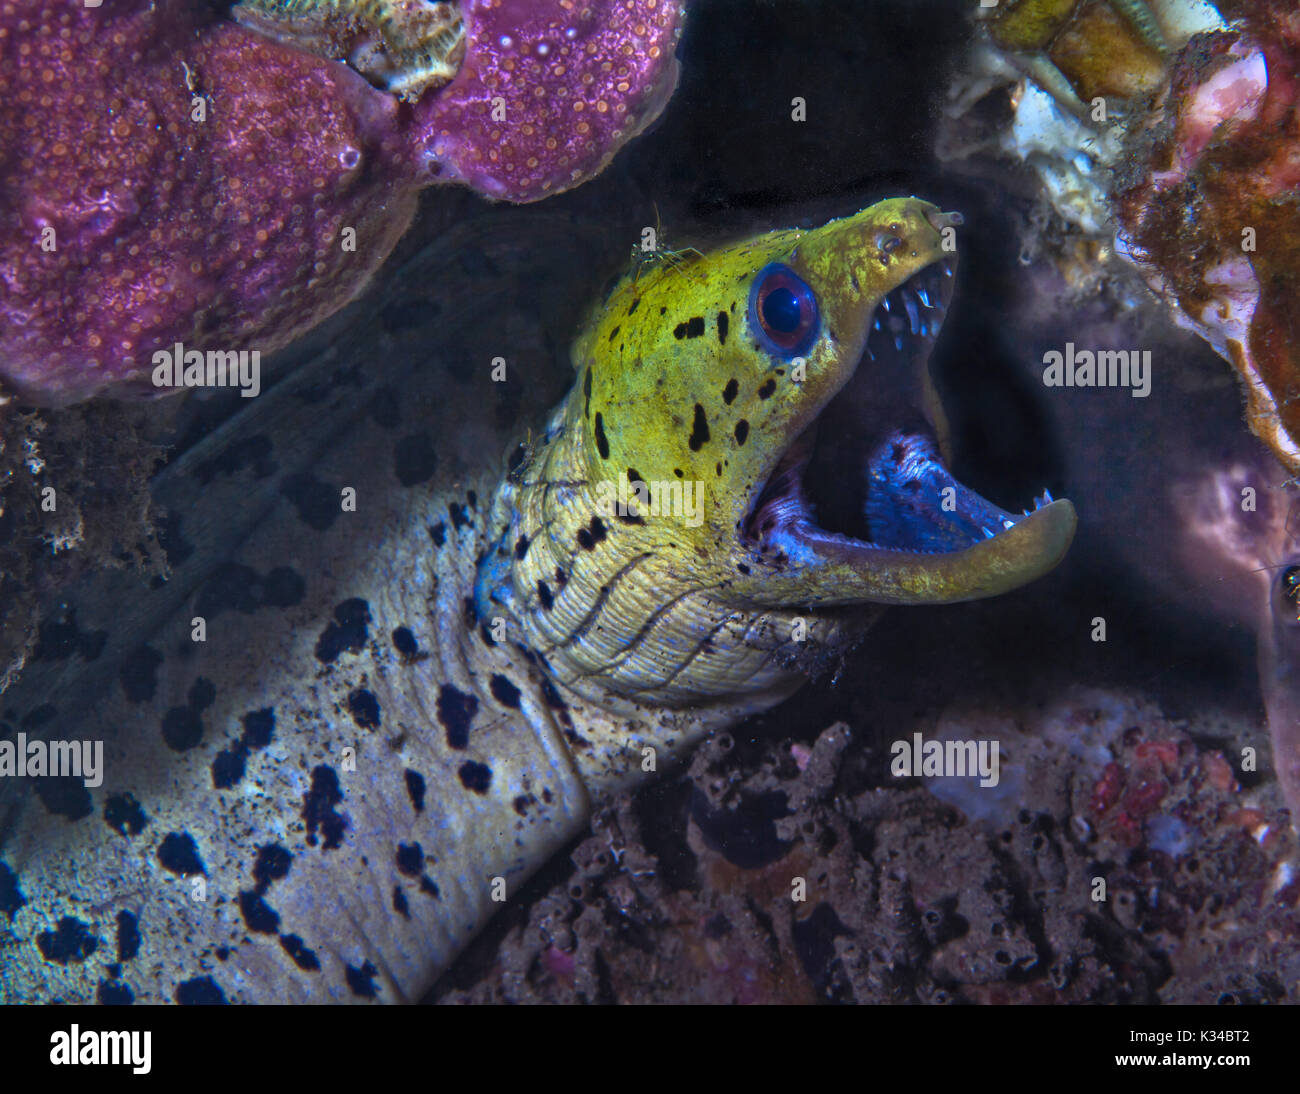 Fimbriated moray eel (Gymnothorax fimbriatus) with cleaner shrimp. Lembeh Straits, Indonesia. Stock Photo